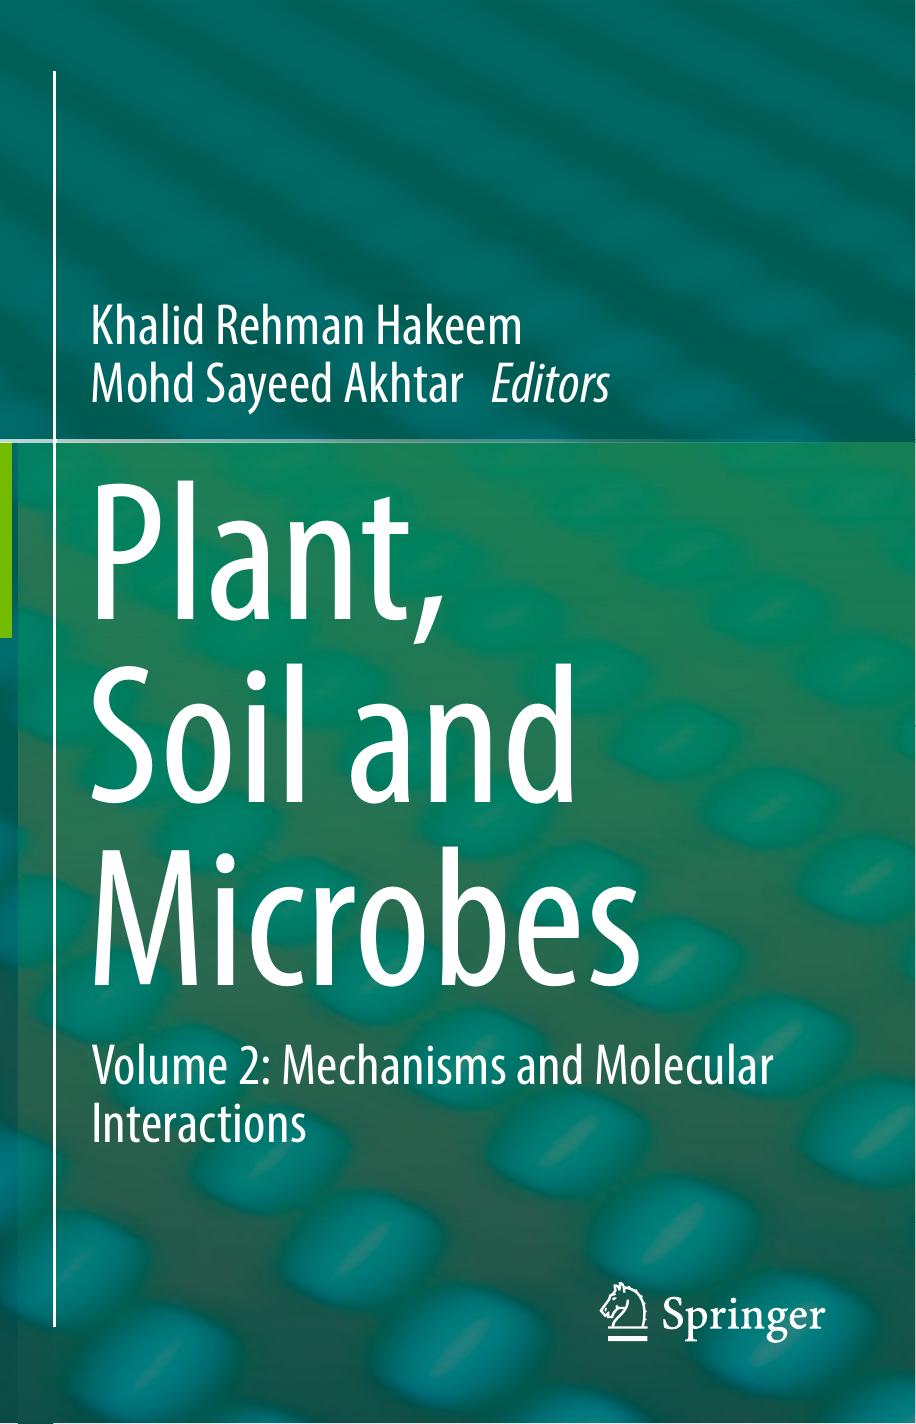 Plant, Soil and Microbes  Volume 2  Mechanisms and Molecular Interactions ( PDFDrive ), 2016